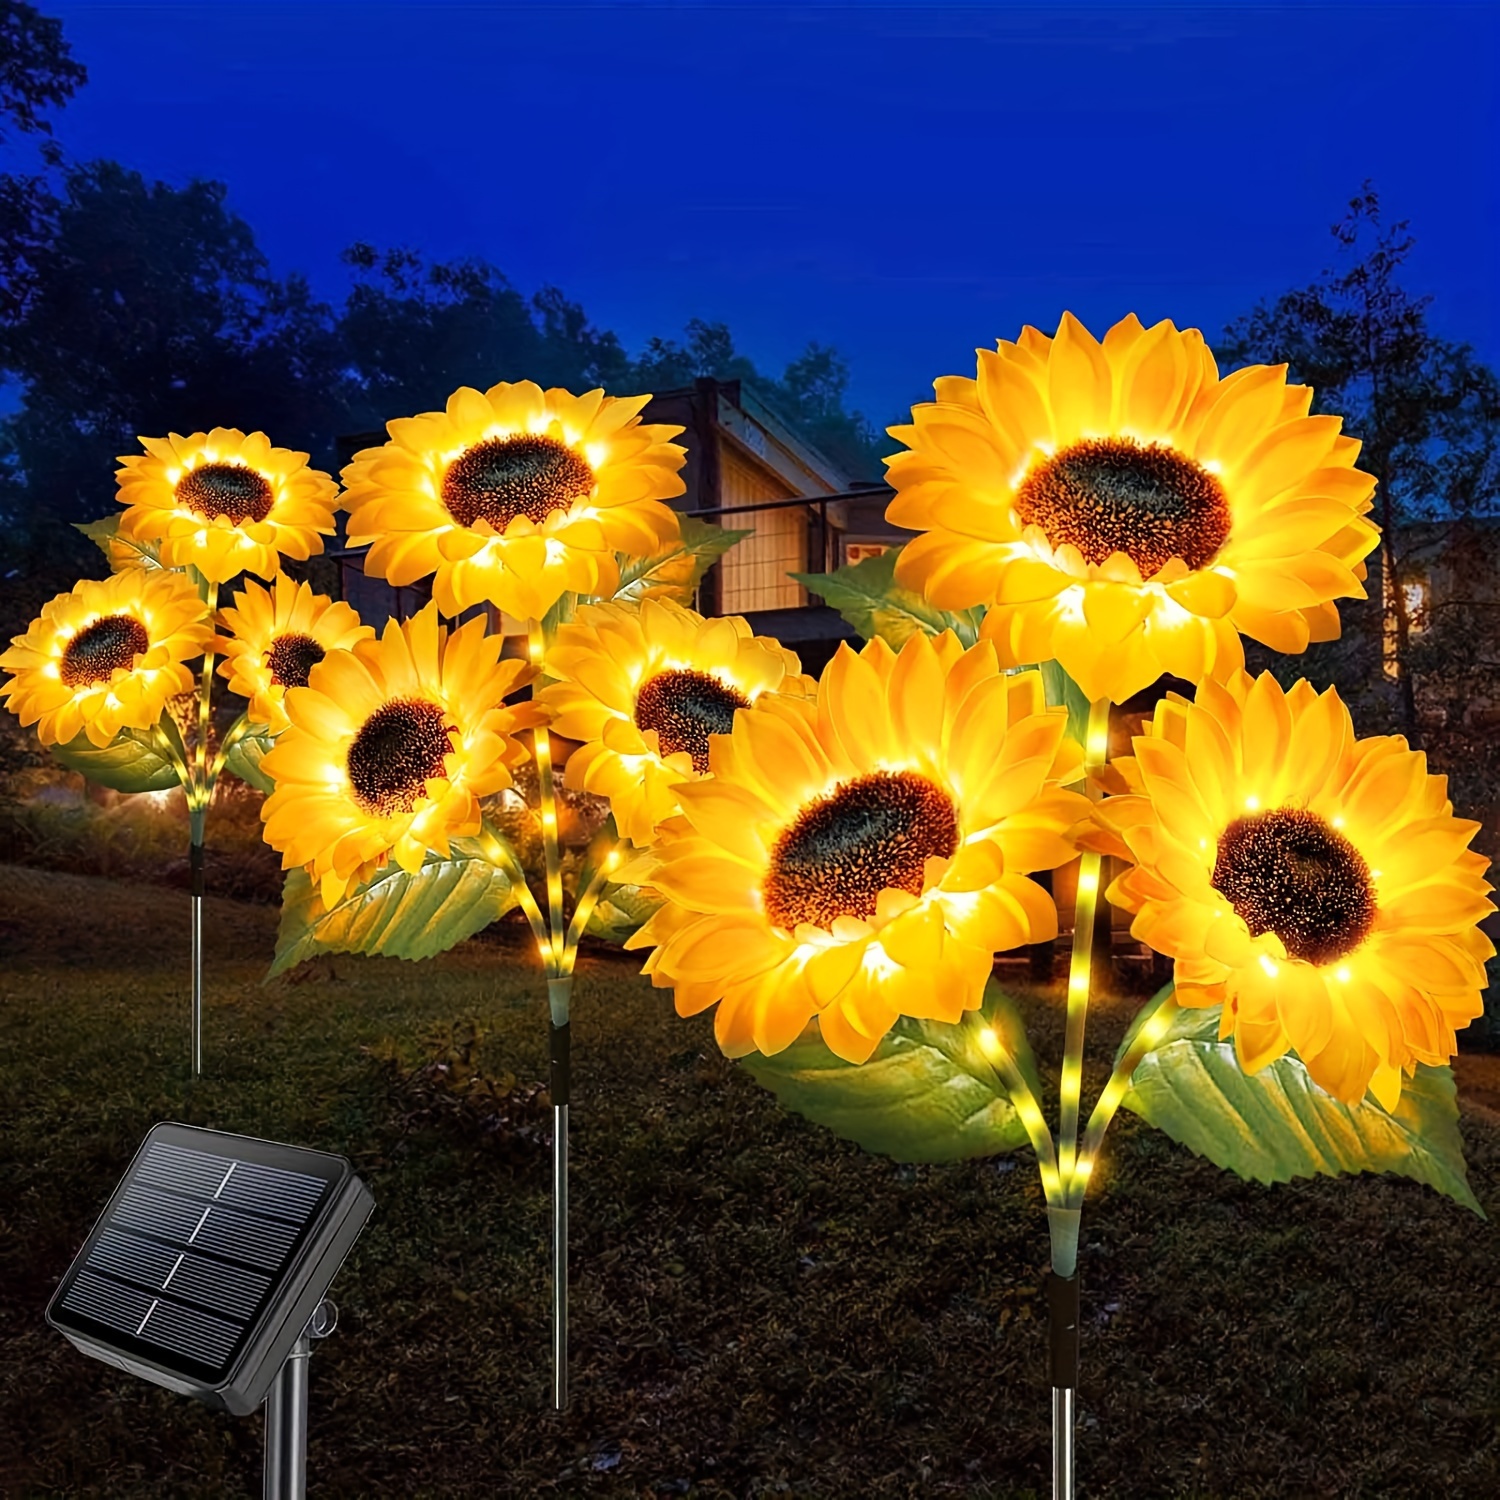 

3pack Solar Lights Outdoor Garden Waterproof, Upgraded 9 Flowers Yard Decor Solar Sunflower Stake Flowers, Lawn Patio Porch Flower Path Cemetery Decor Led Artificial Flowers